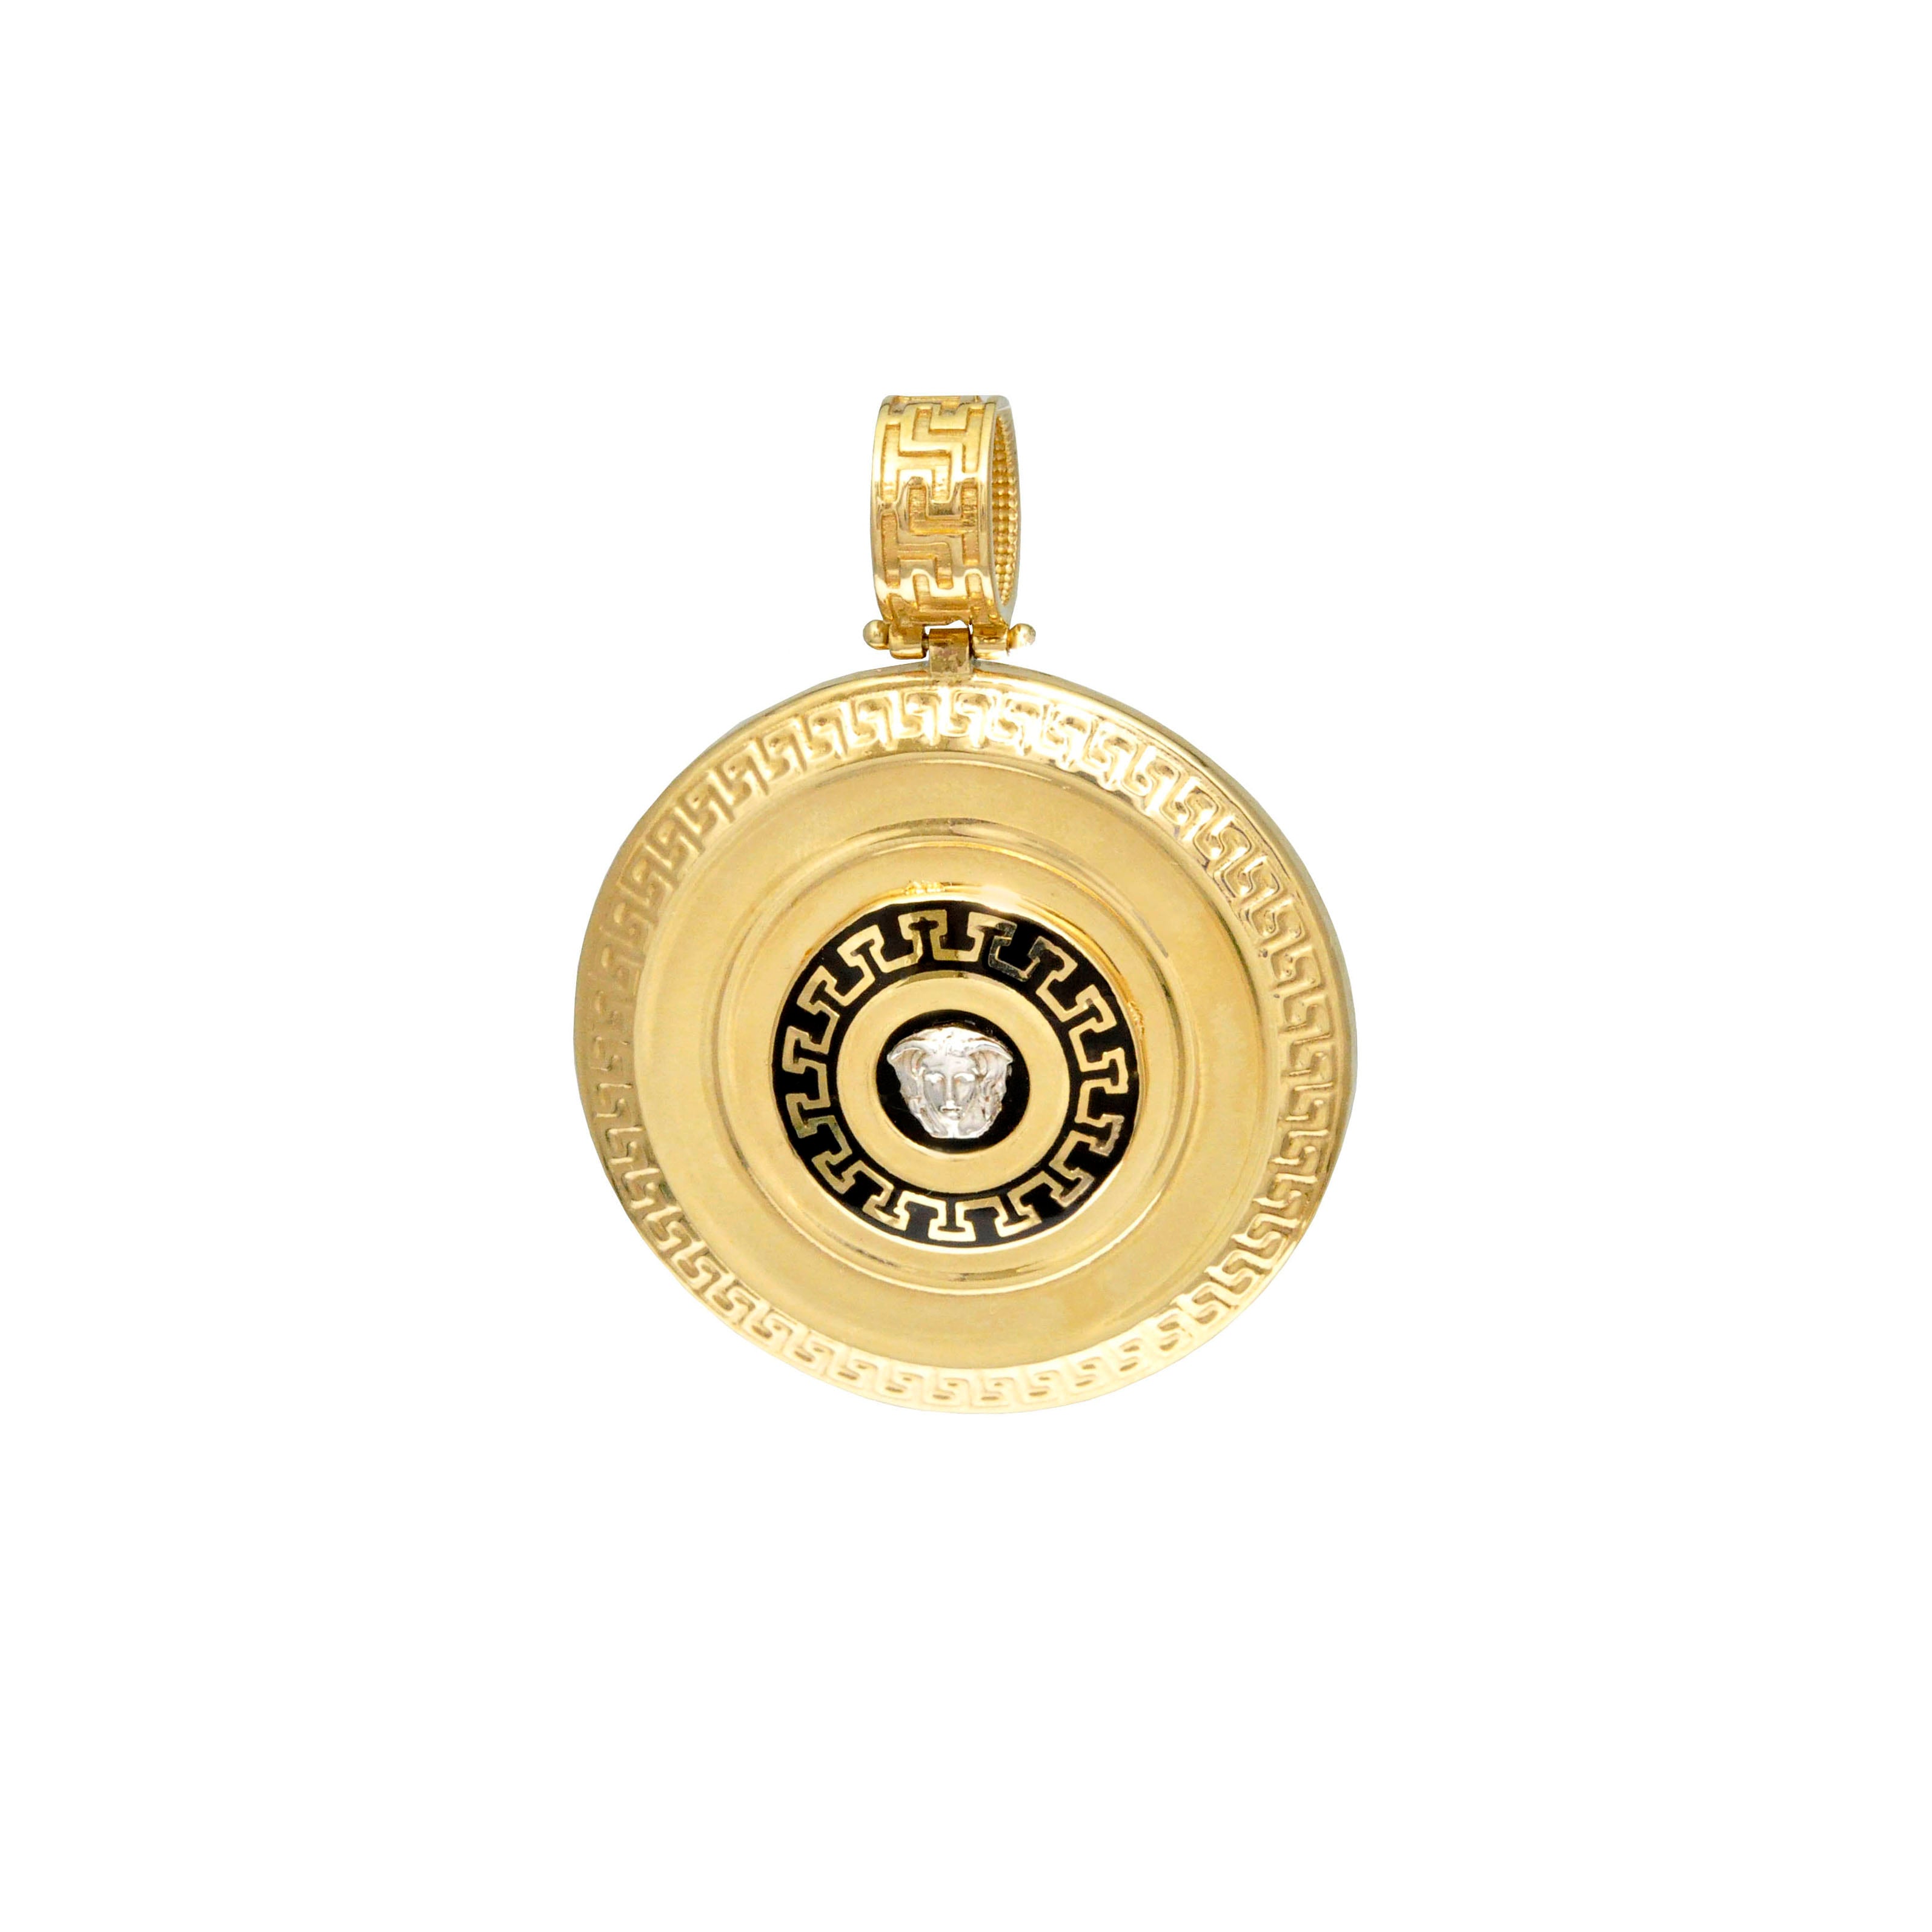 Large Versace style pendant in 14K yellow gold with enamel.